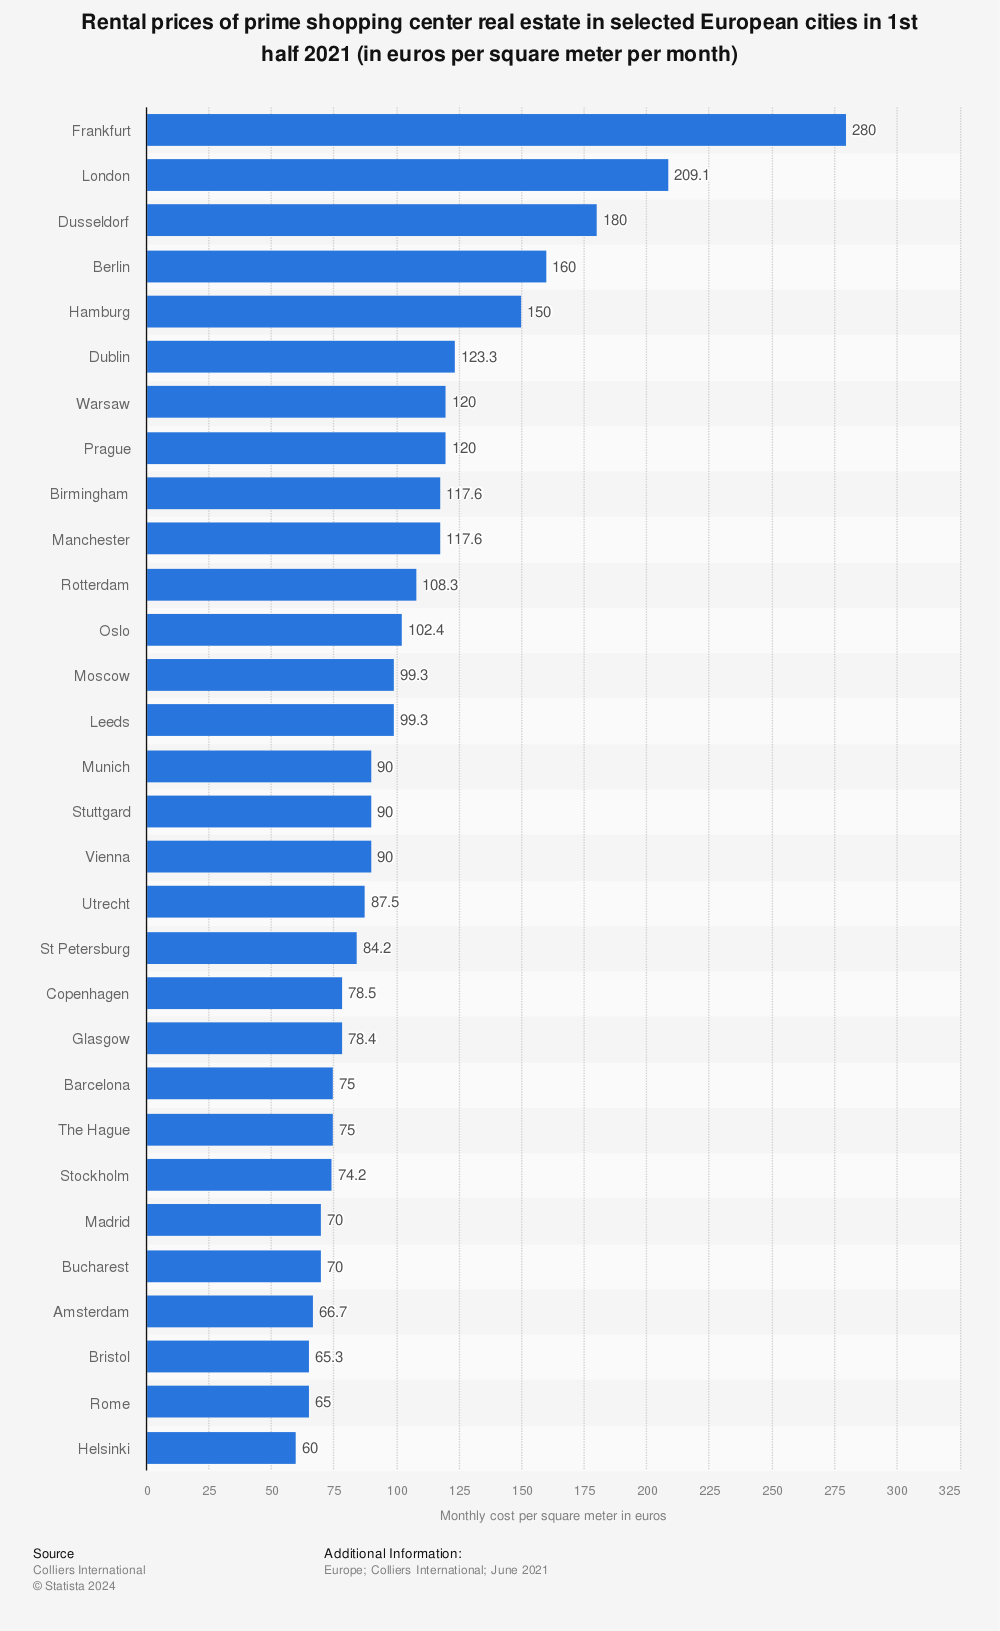 Statistic: Rental prices of prime shopping center real estate in selected European cities in 1st half 2021 (in euros per square meter per month) | Statista